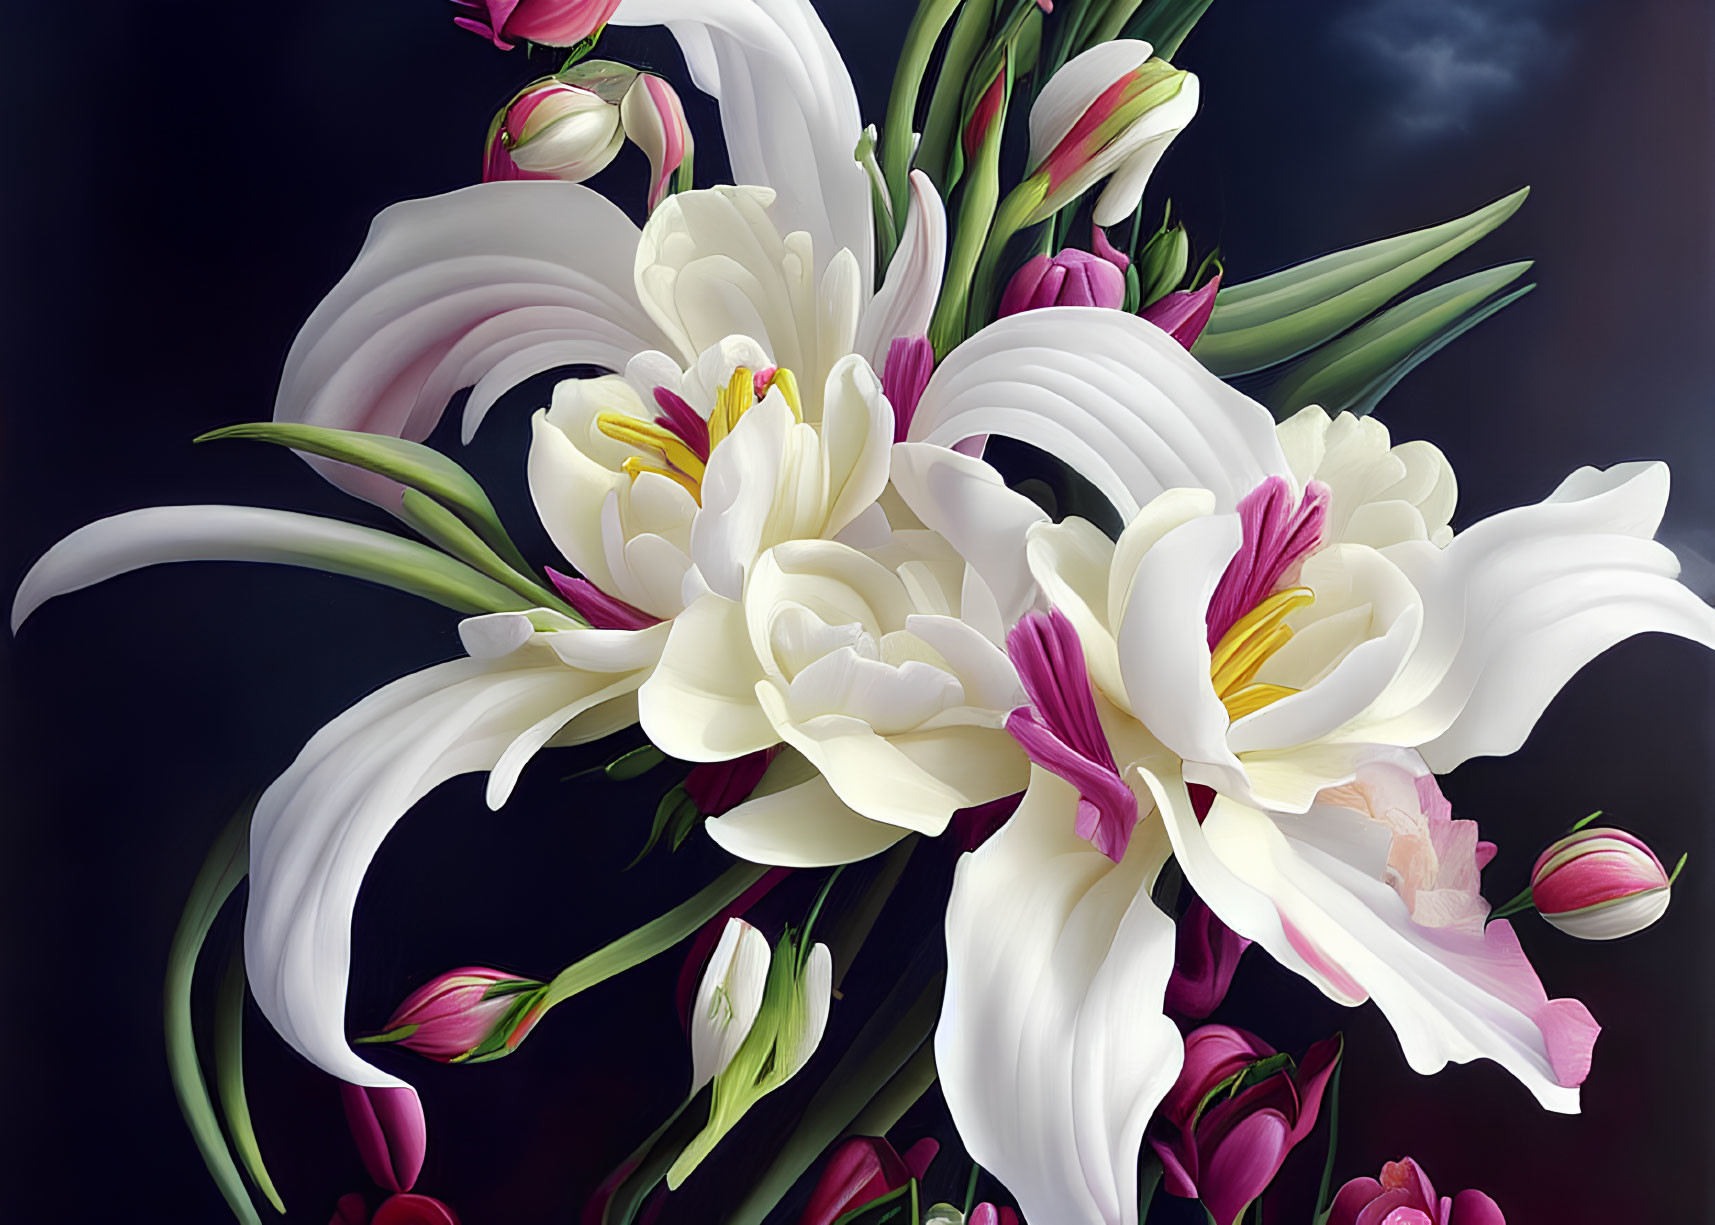 White Lilies with Pink and Purple Buds on Dark Cloudy Background